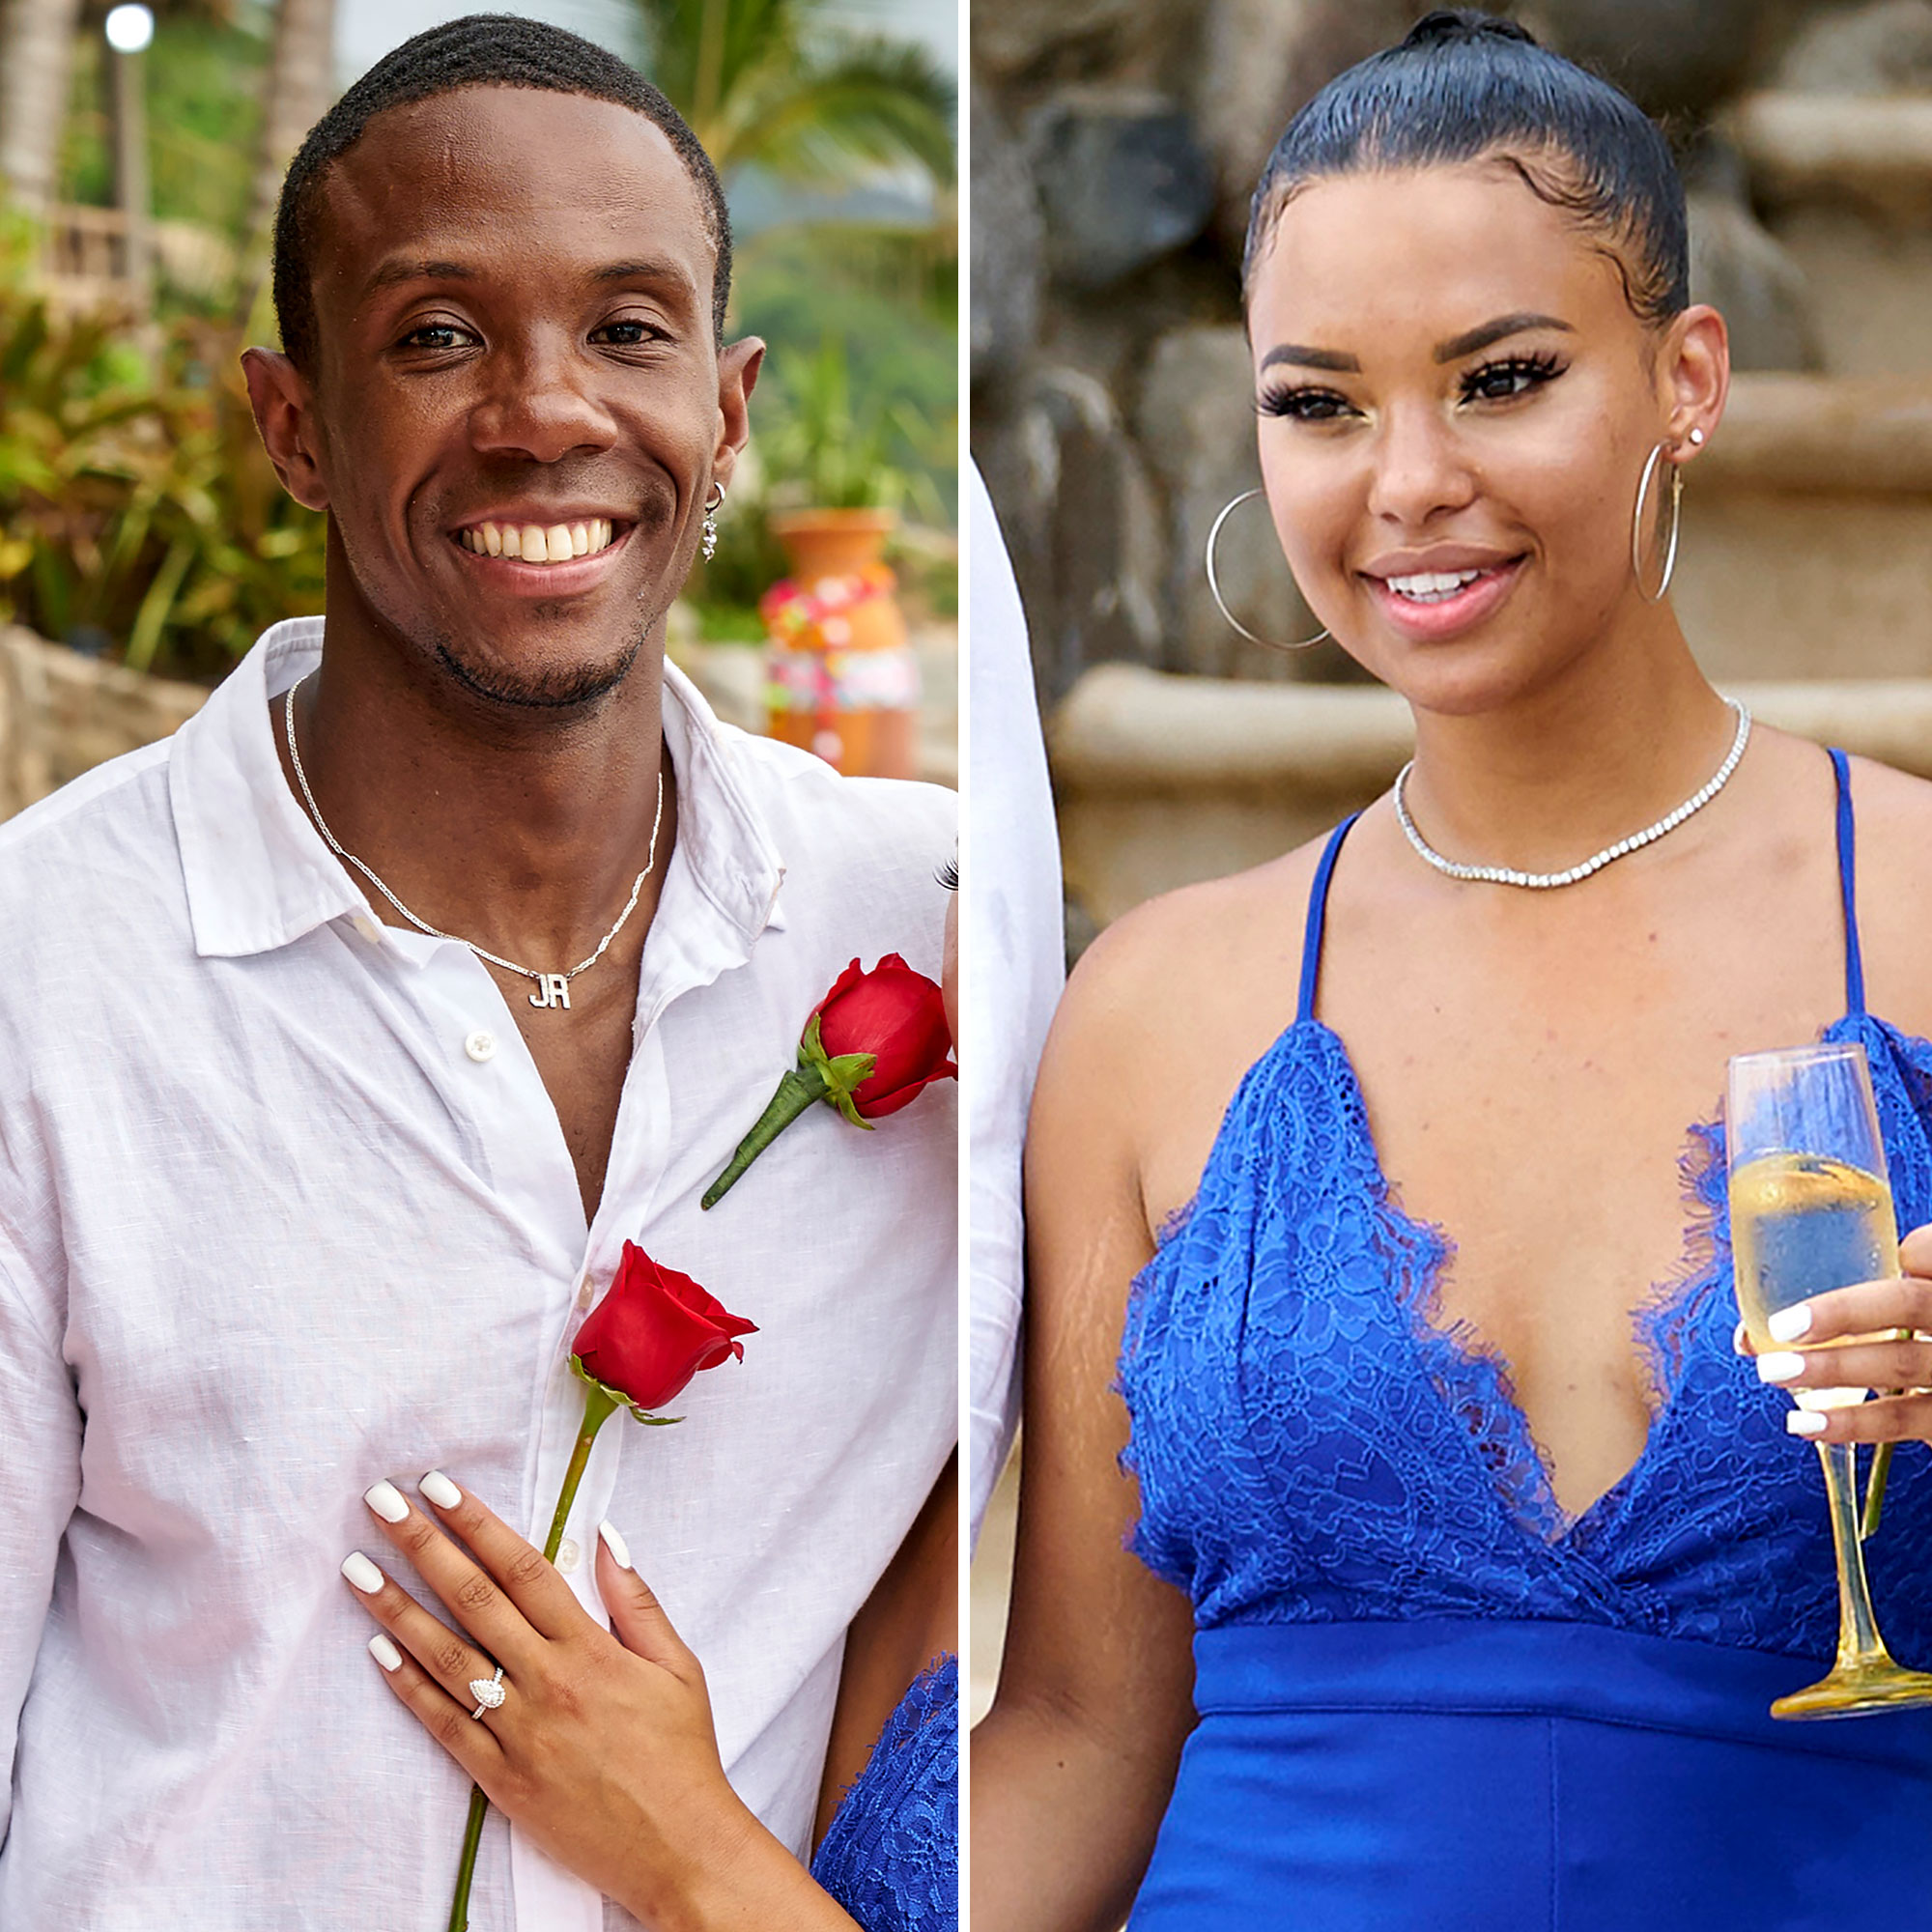 EXCLUSIVE: Riley Christian Shares How Bachelor Nation Fans Can